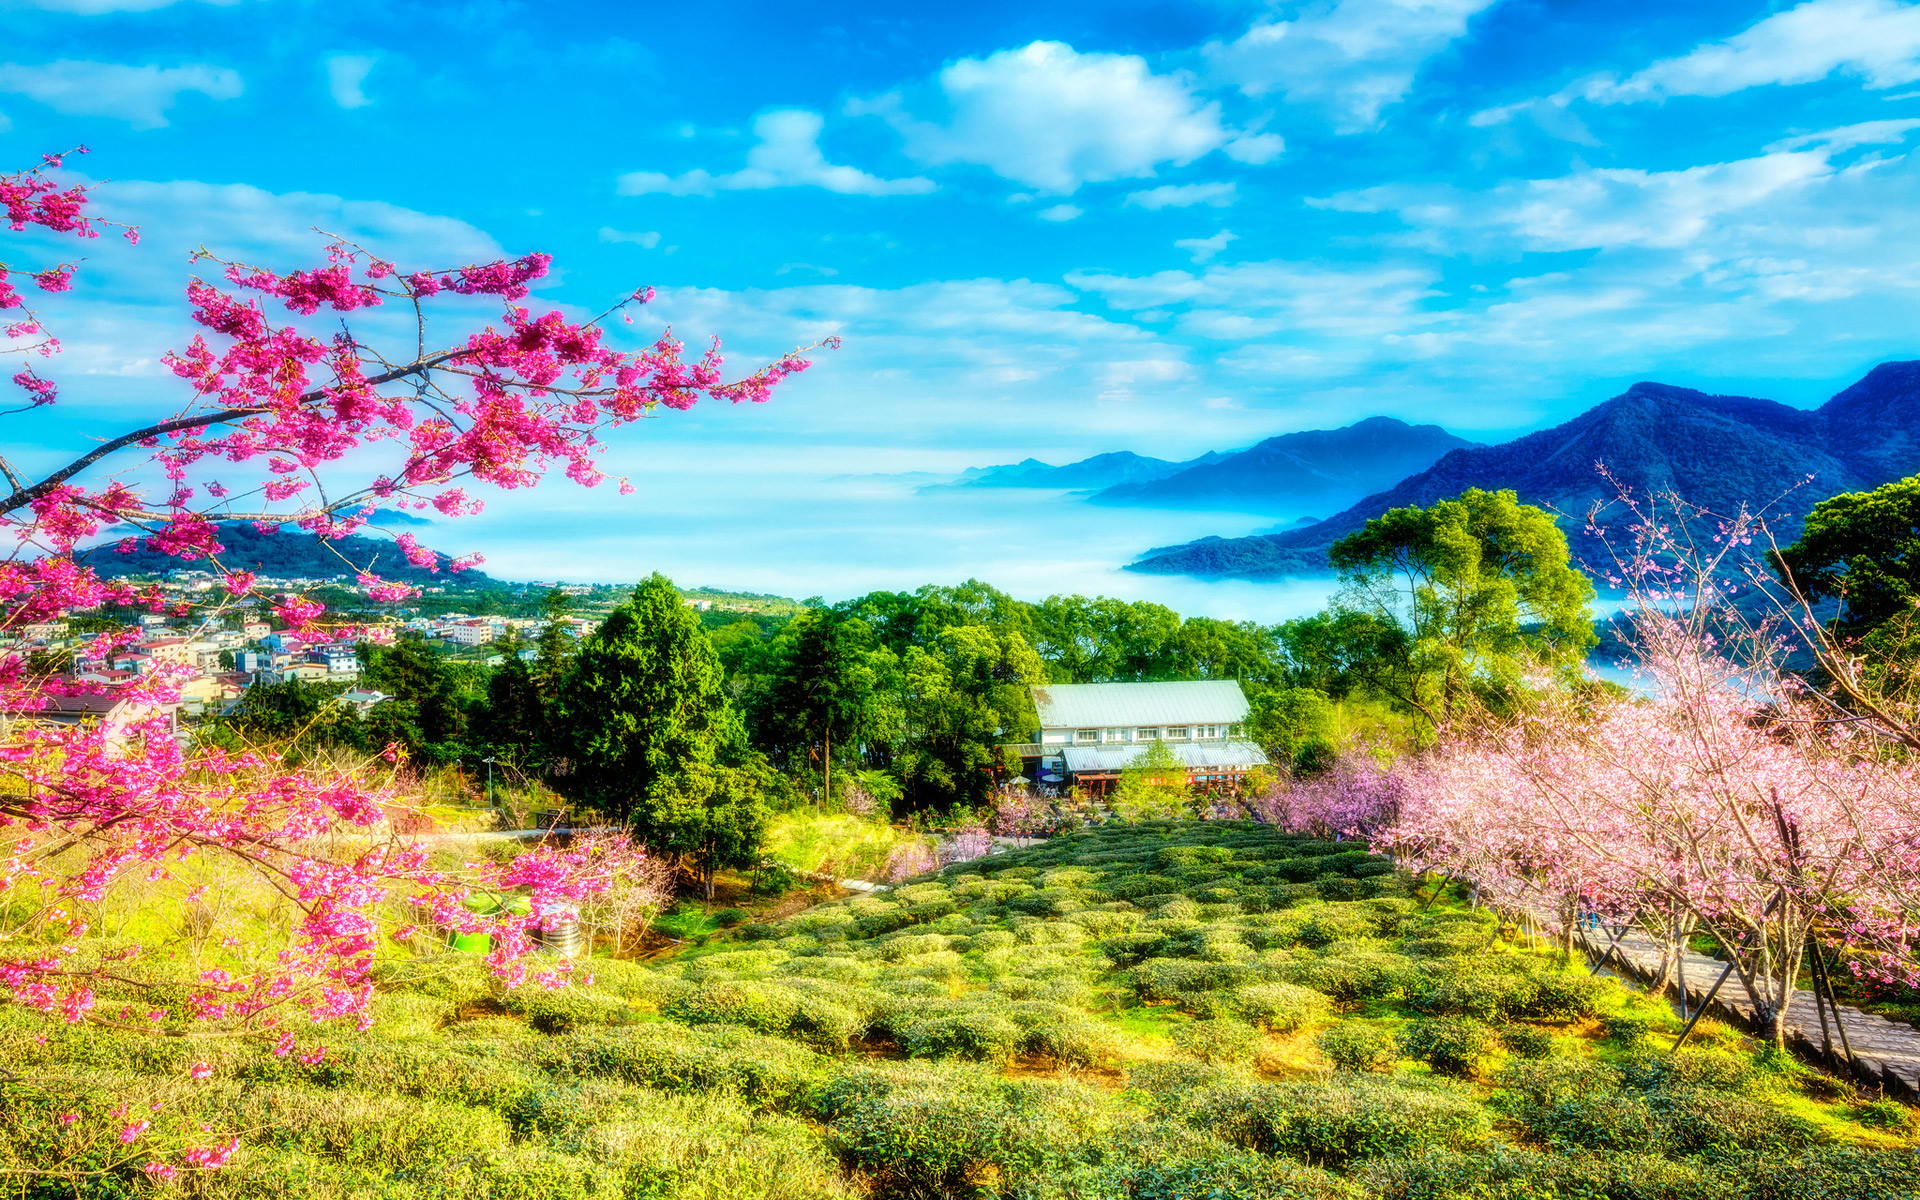 48 Chinese Scenery Wallpaper On, Beautiful Chinese Landscape Wallpaper Pictures